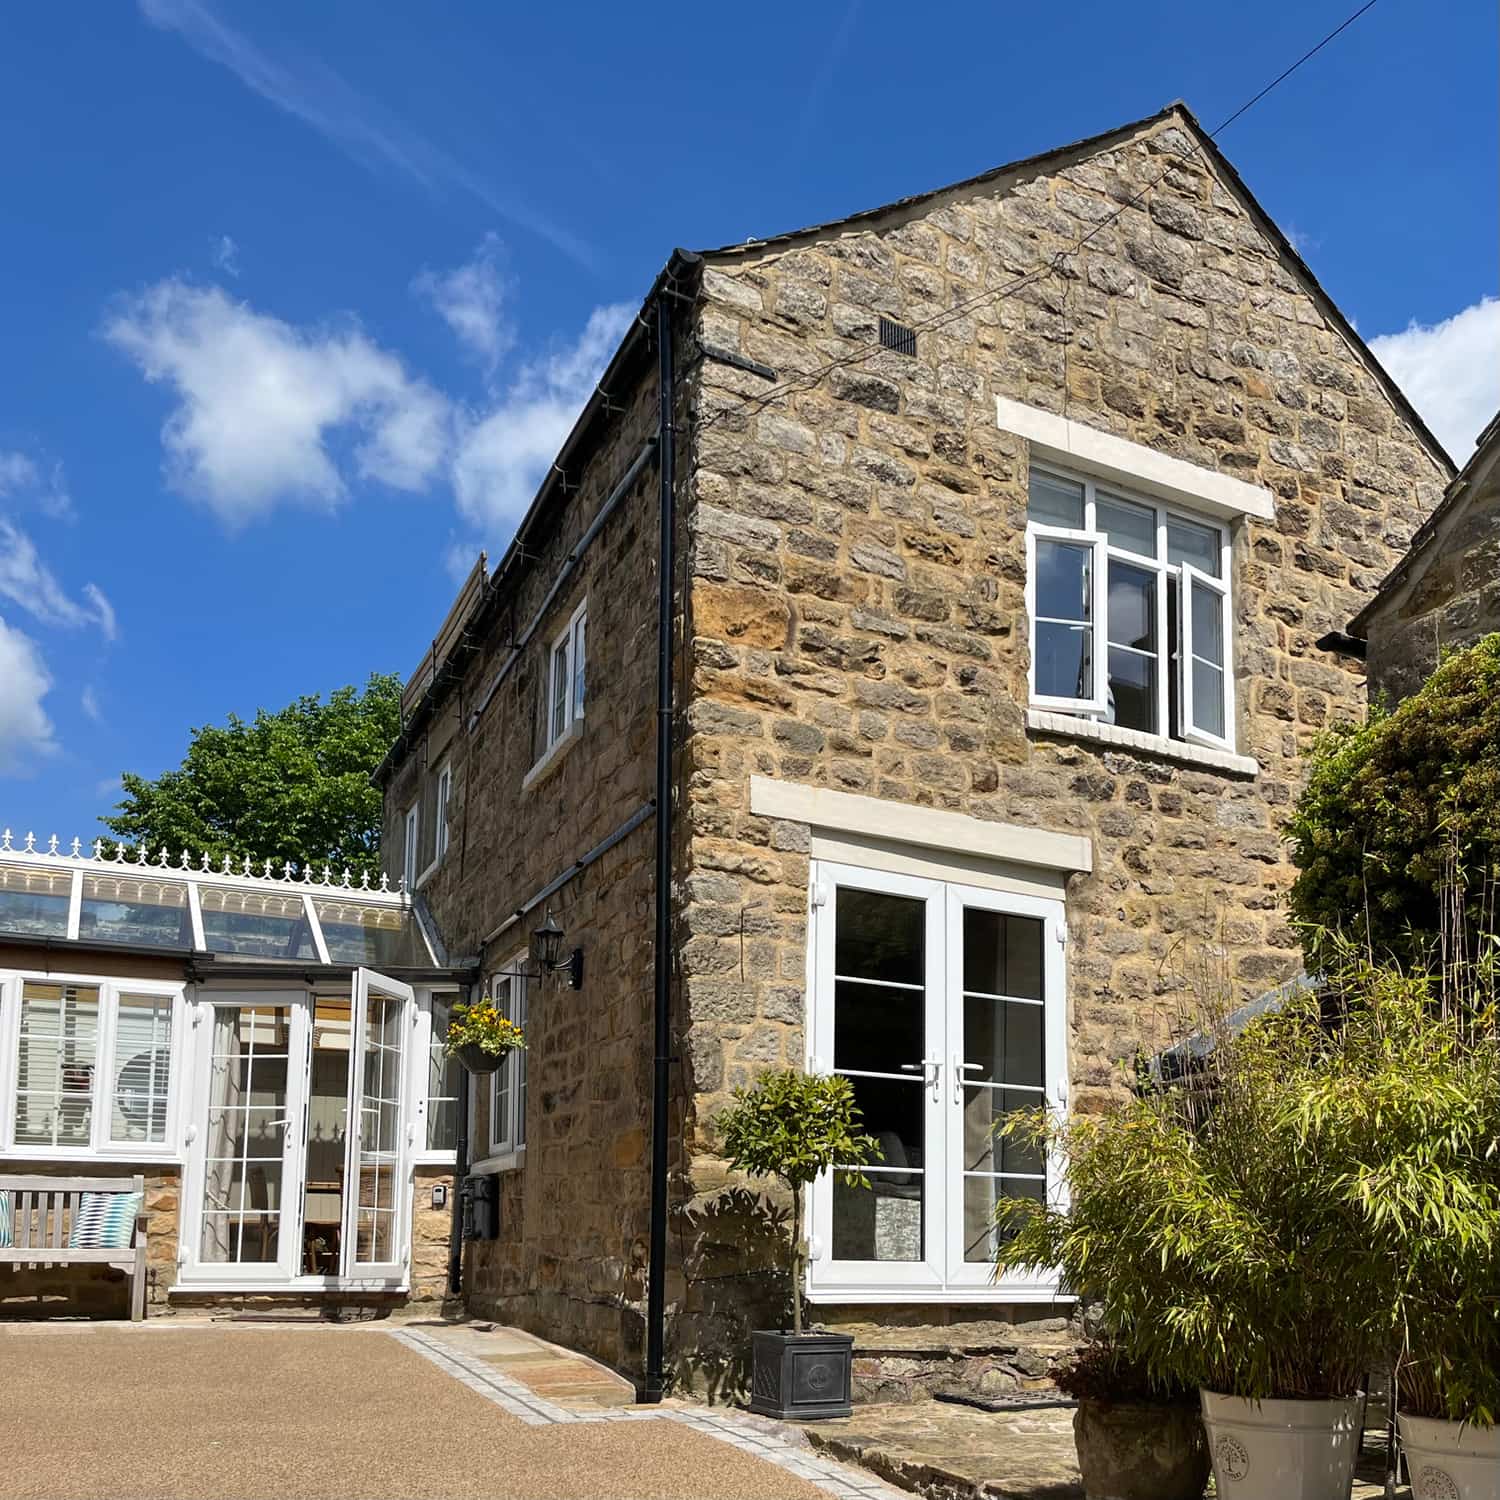 Hall Cottage | Baslow holiday cottages - Near Chatsworth House | Peak District09o-=0